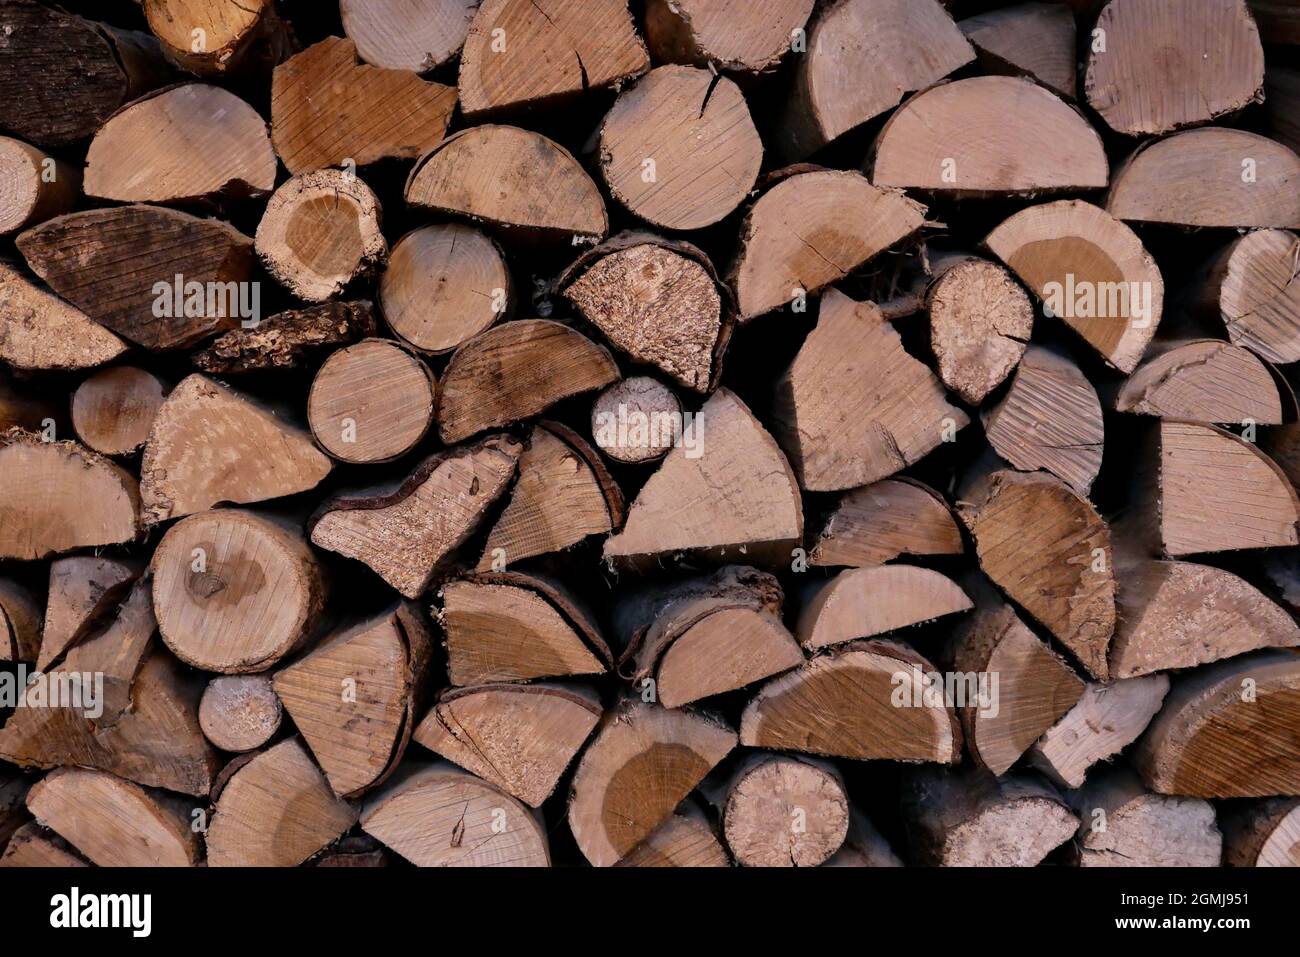 Full frame image of sawn tree trunks and logs showing woodgrain detail Stock Photo